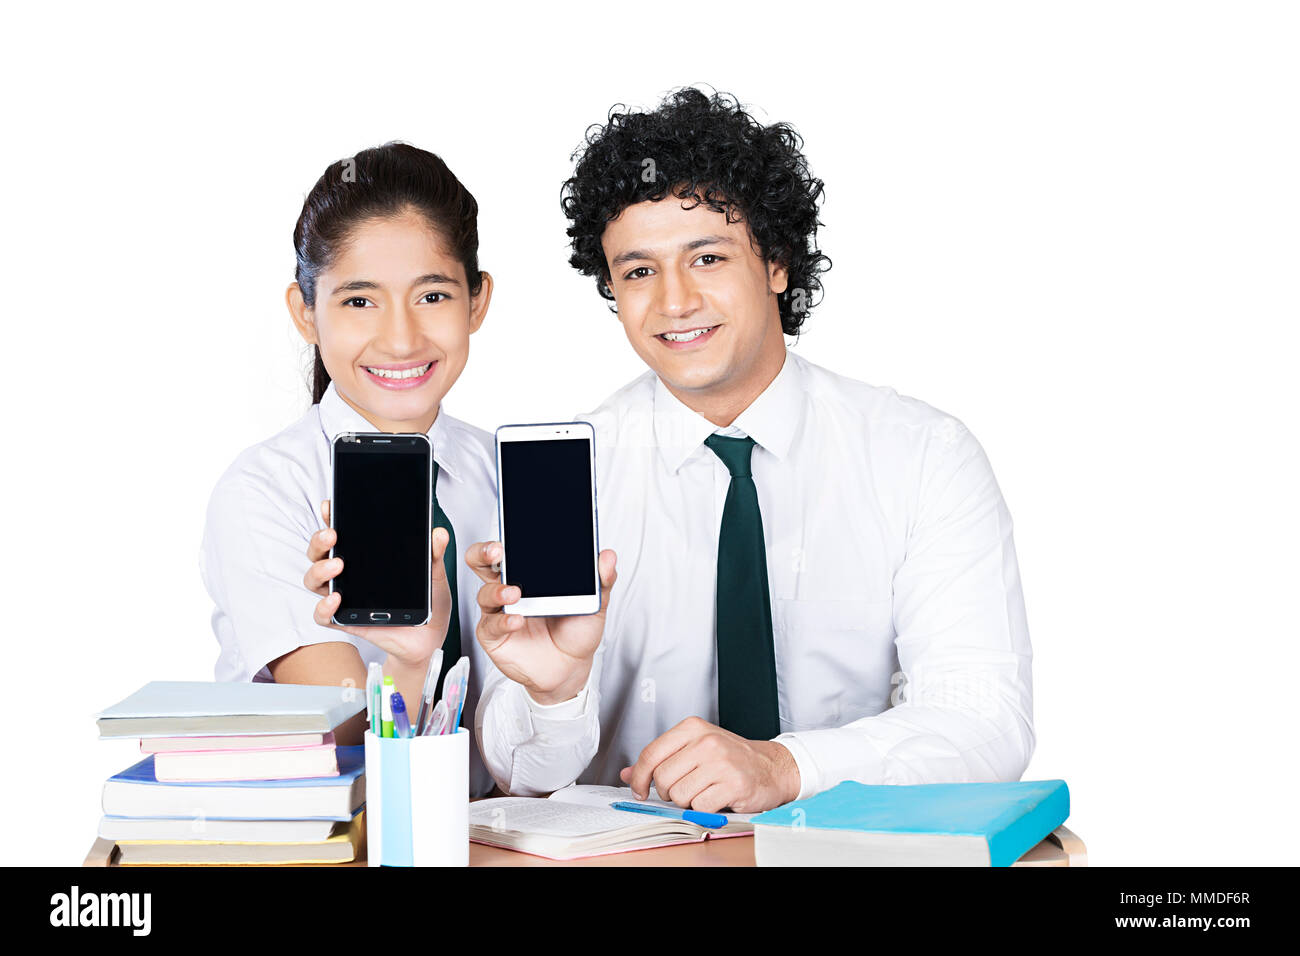 Two Teenager High School Students Friend Classmate Showing Smartphone In-Class Stock Photo